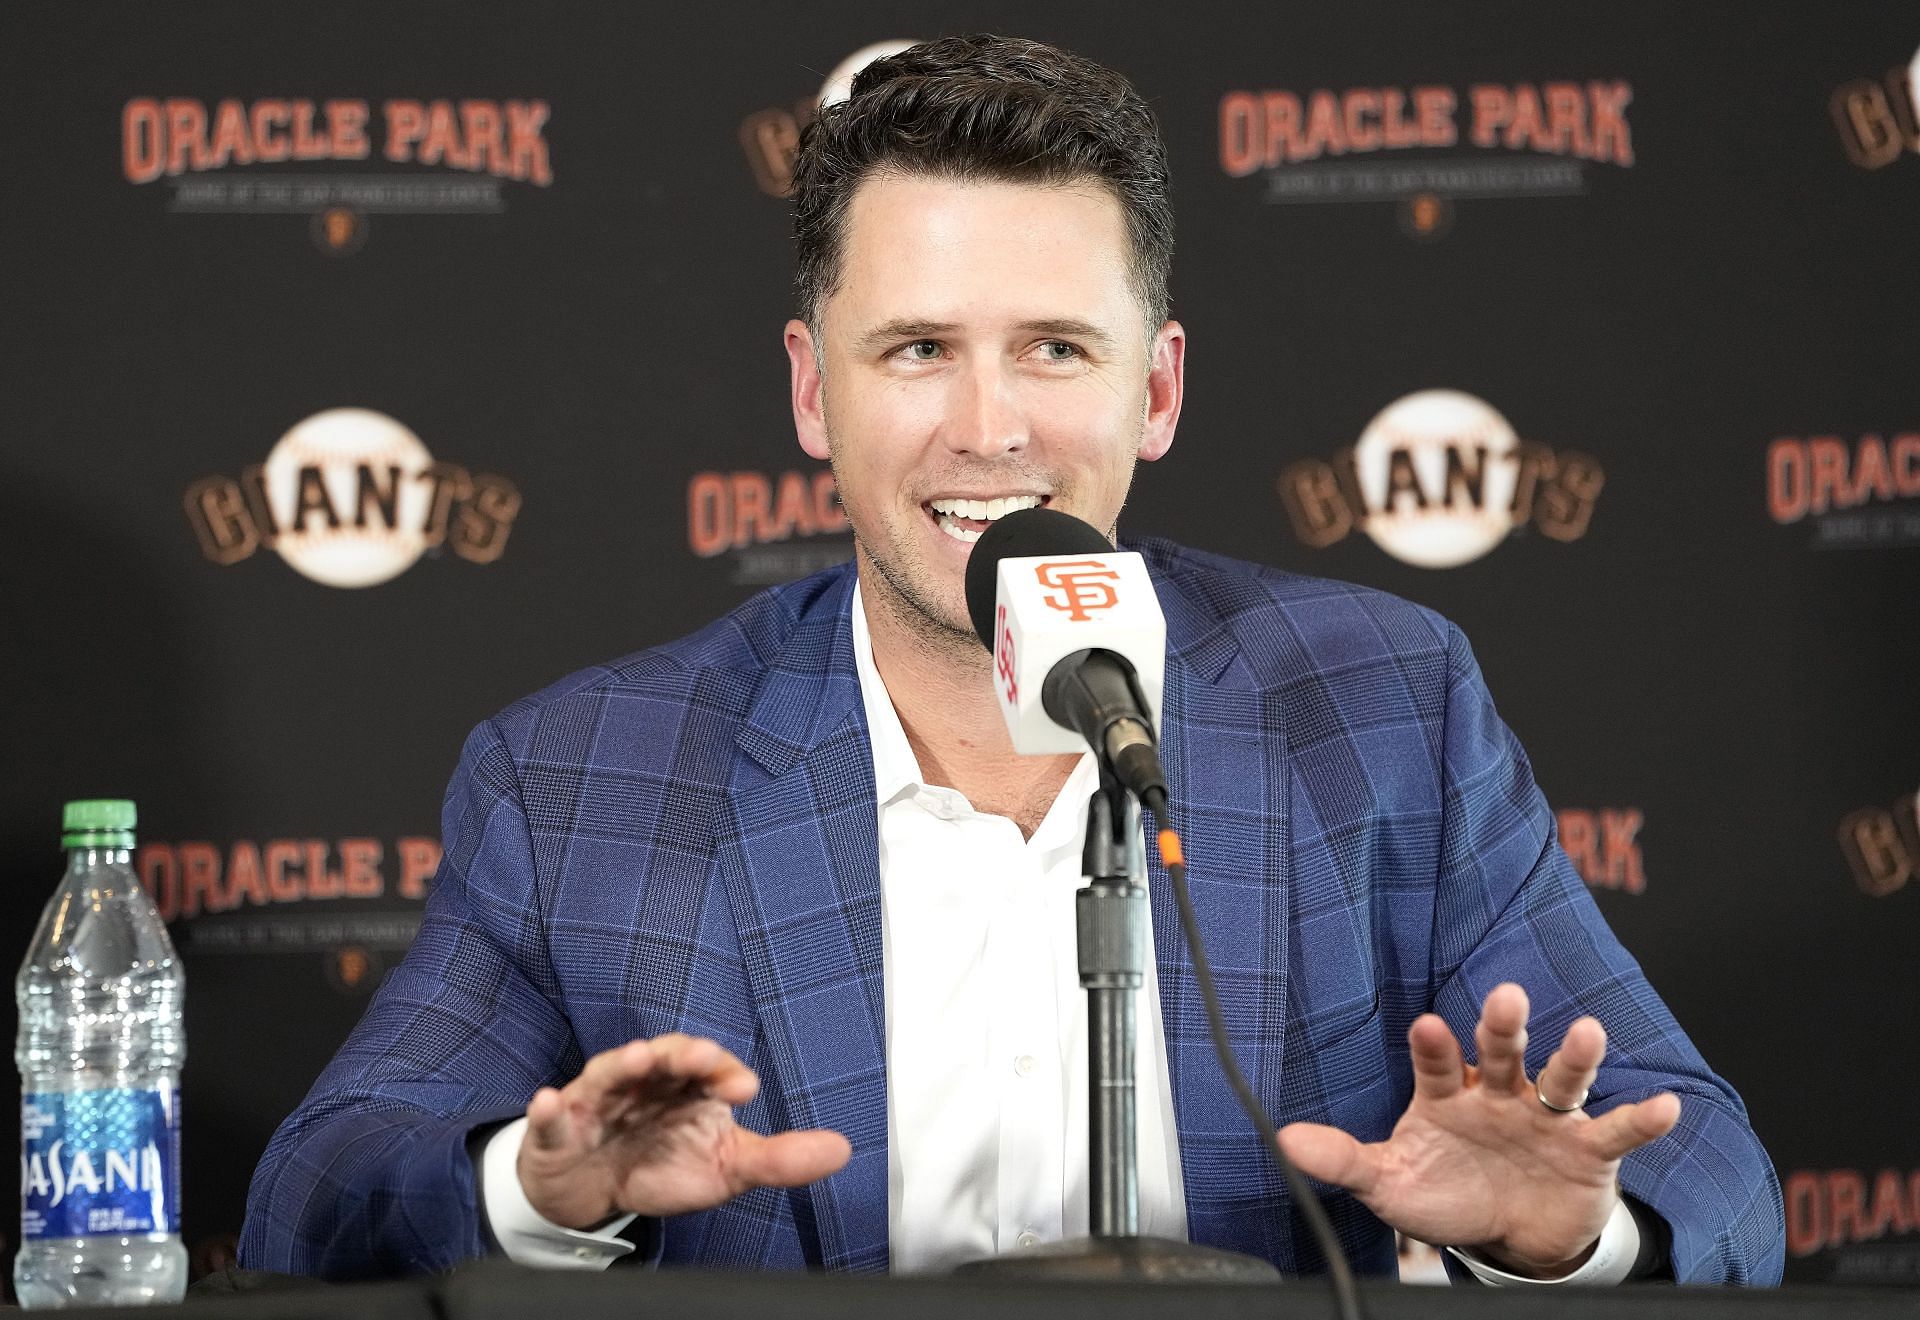 Giants legend Buster Posey returning to Florida State to finish his degree  